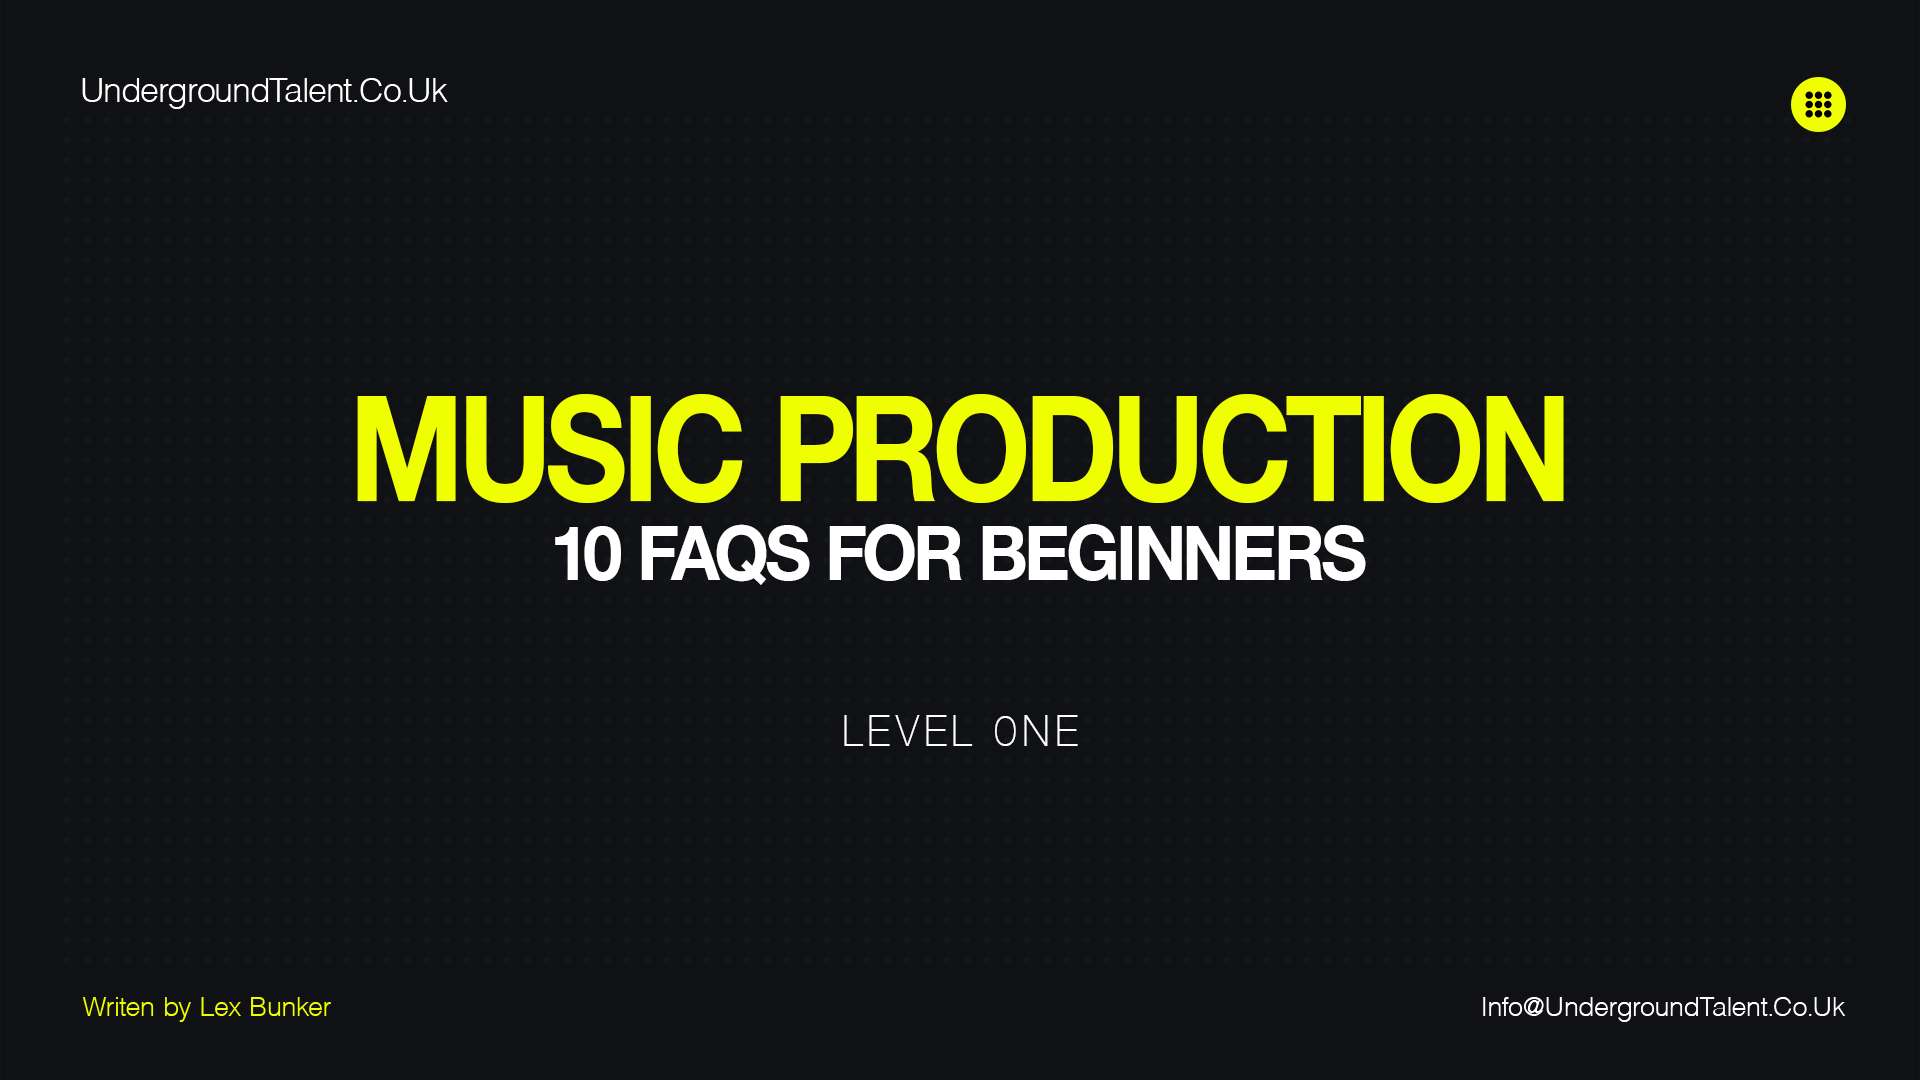 Music Production: 10 FAQs for Beginners at Level One 